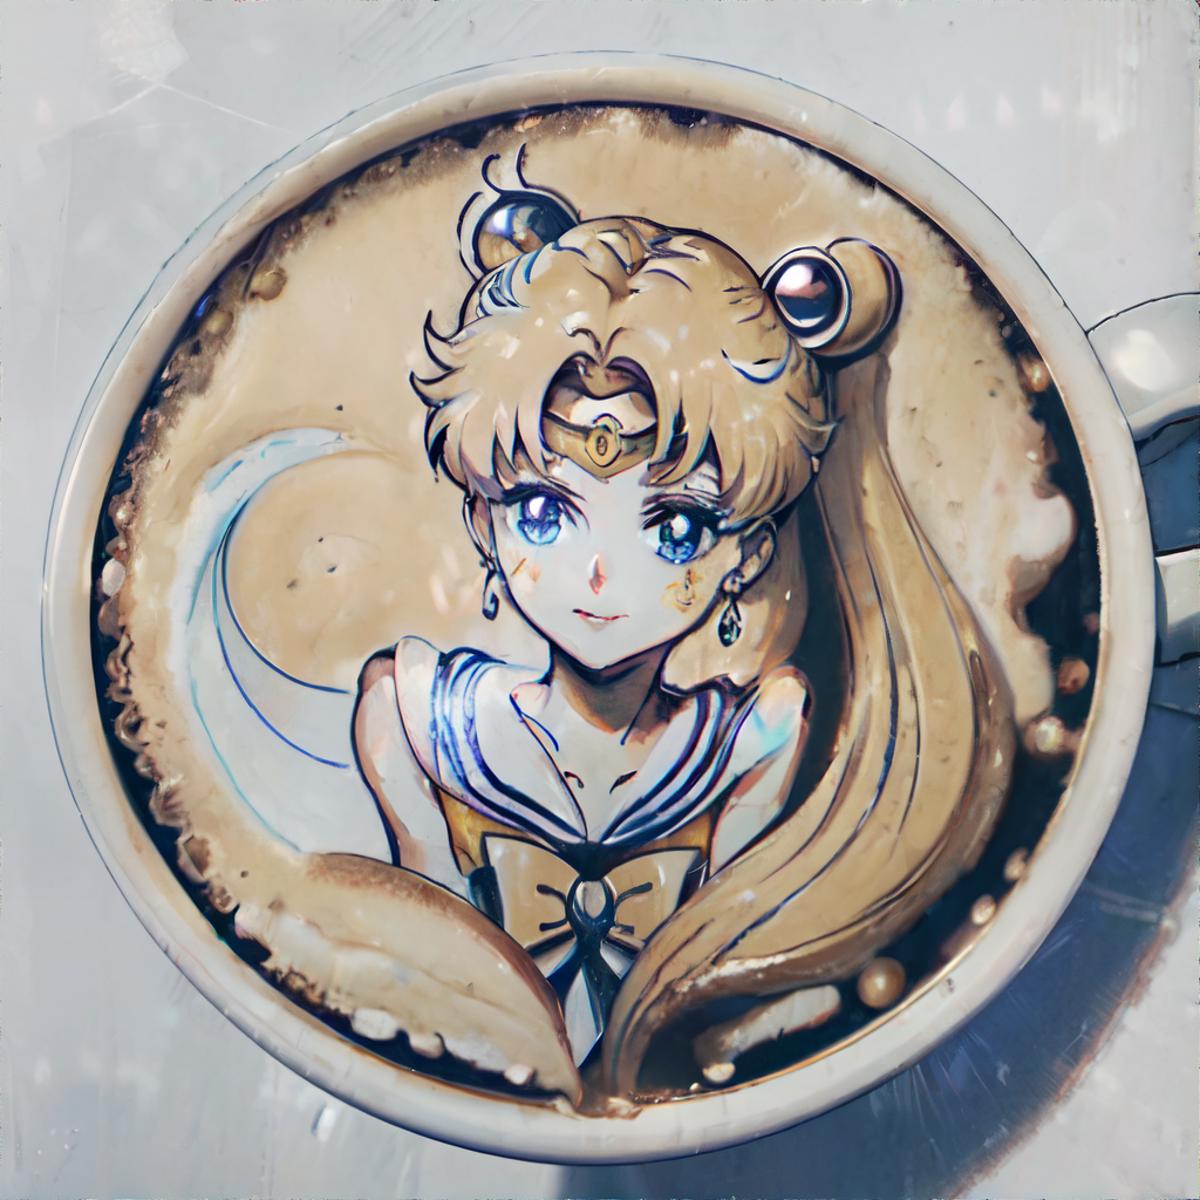 latte art(character) image by bzlibby